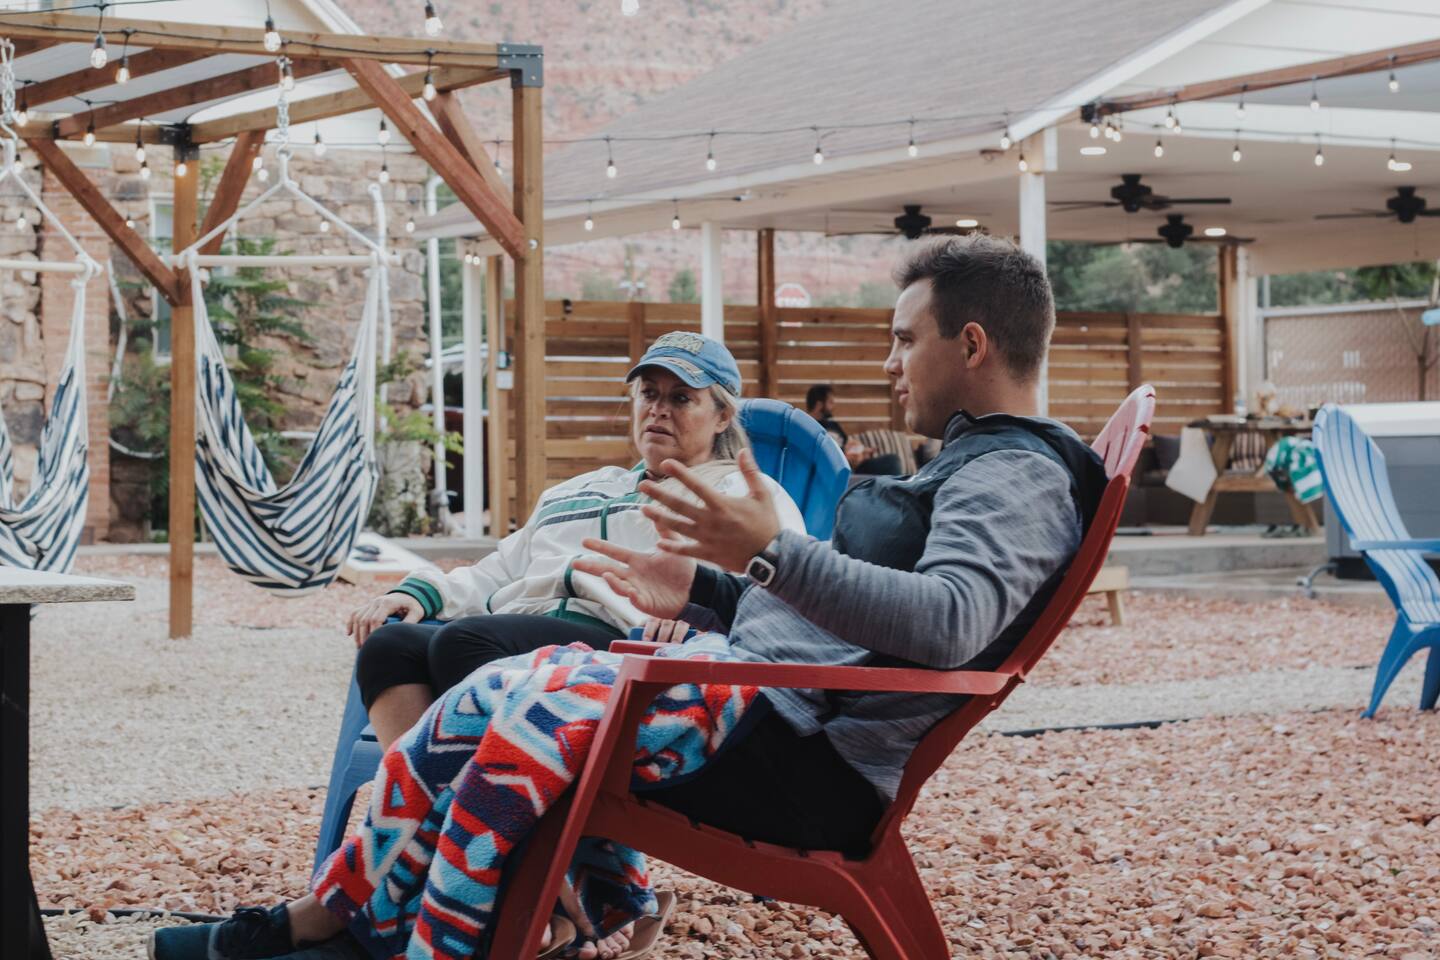  Two people engaged in a conversation while sitting on red Adirondack chairs in a patio area with a pebble ground cover, striped hammocks in the background, and a pergola with string lights above.